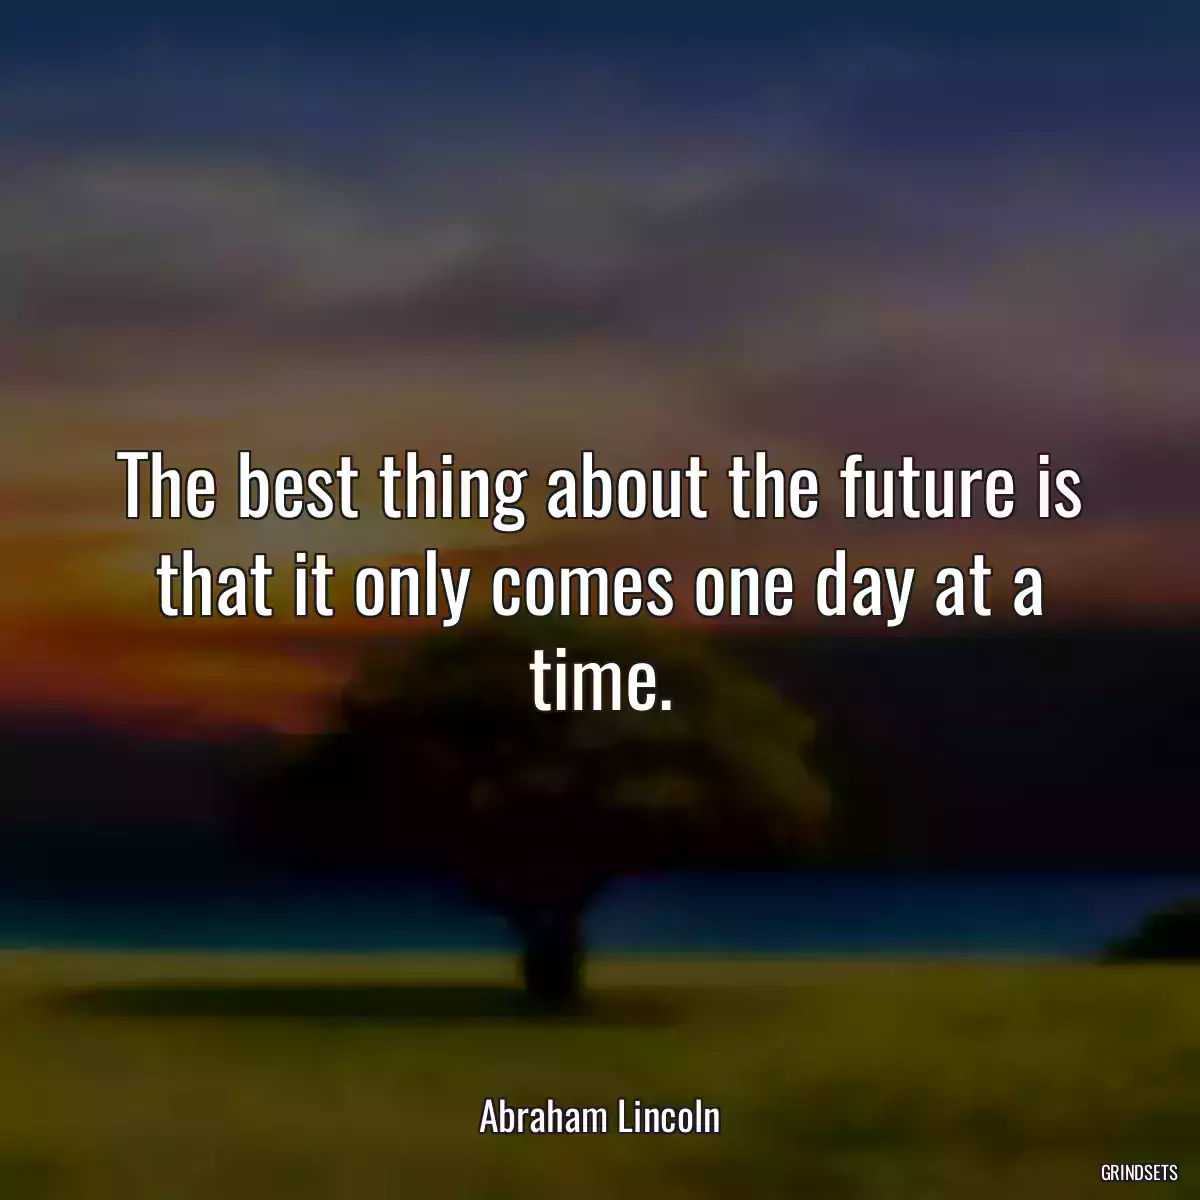 The best thing about the future is that it only comes one day at a time.